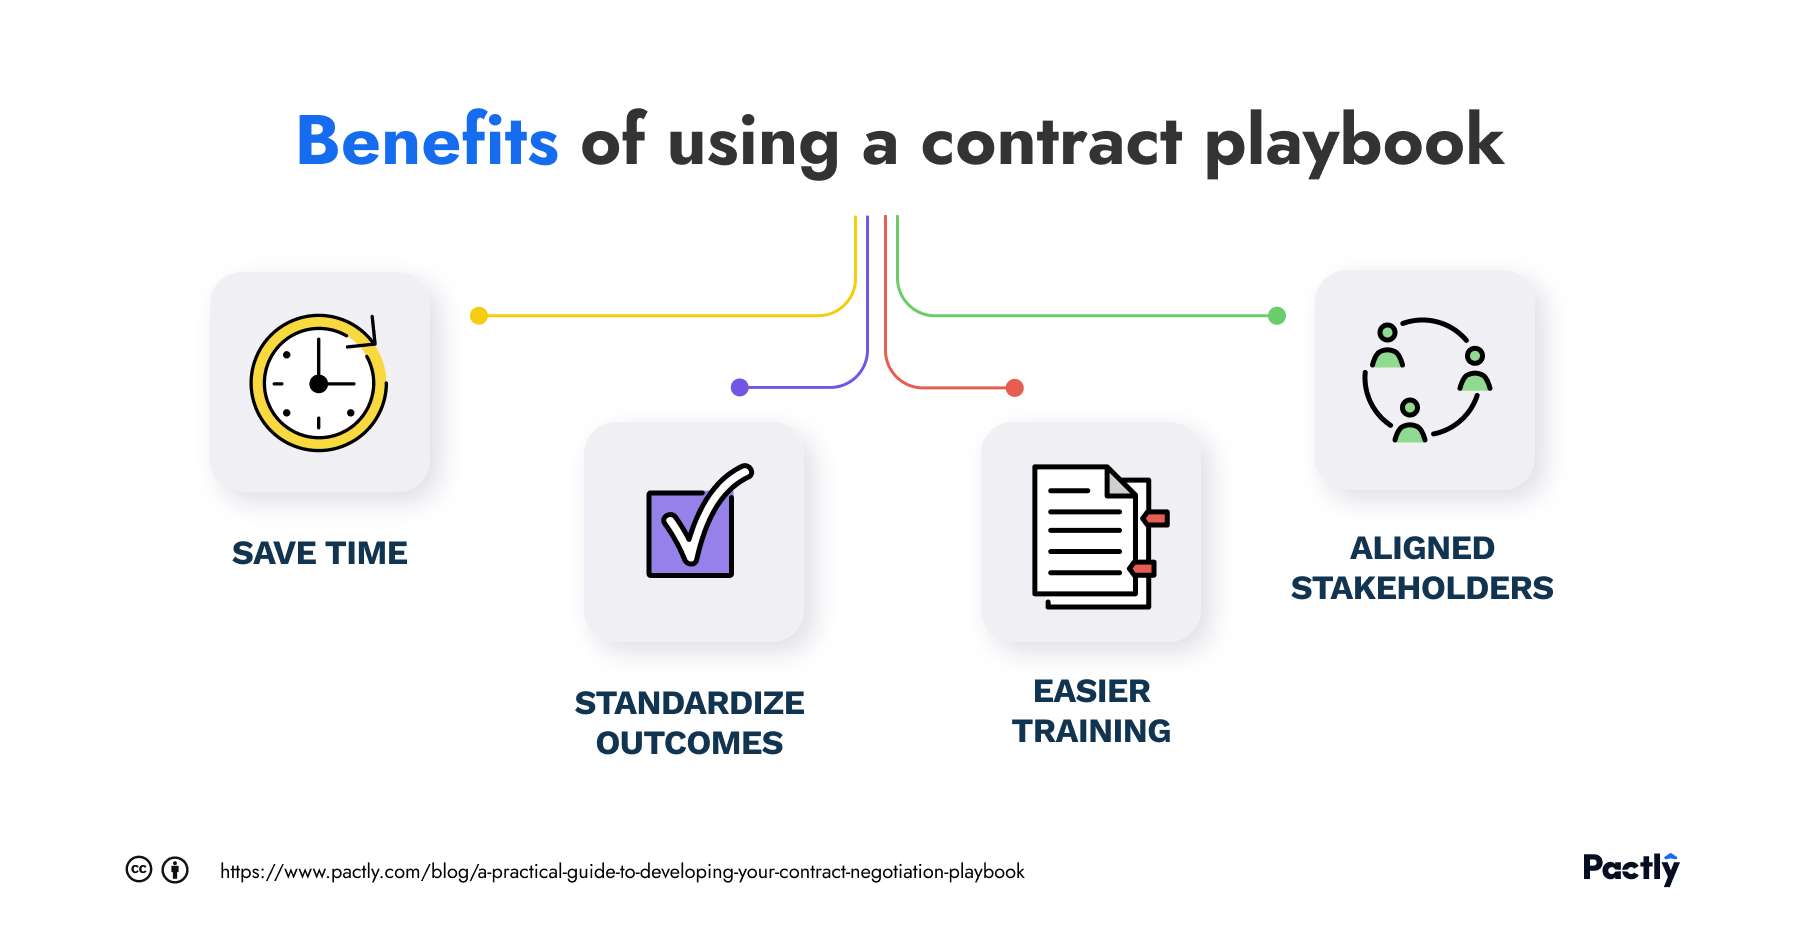 Illustration of benefits of using a contract playbook